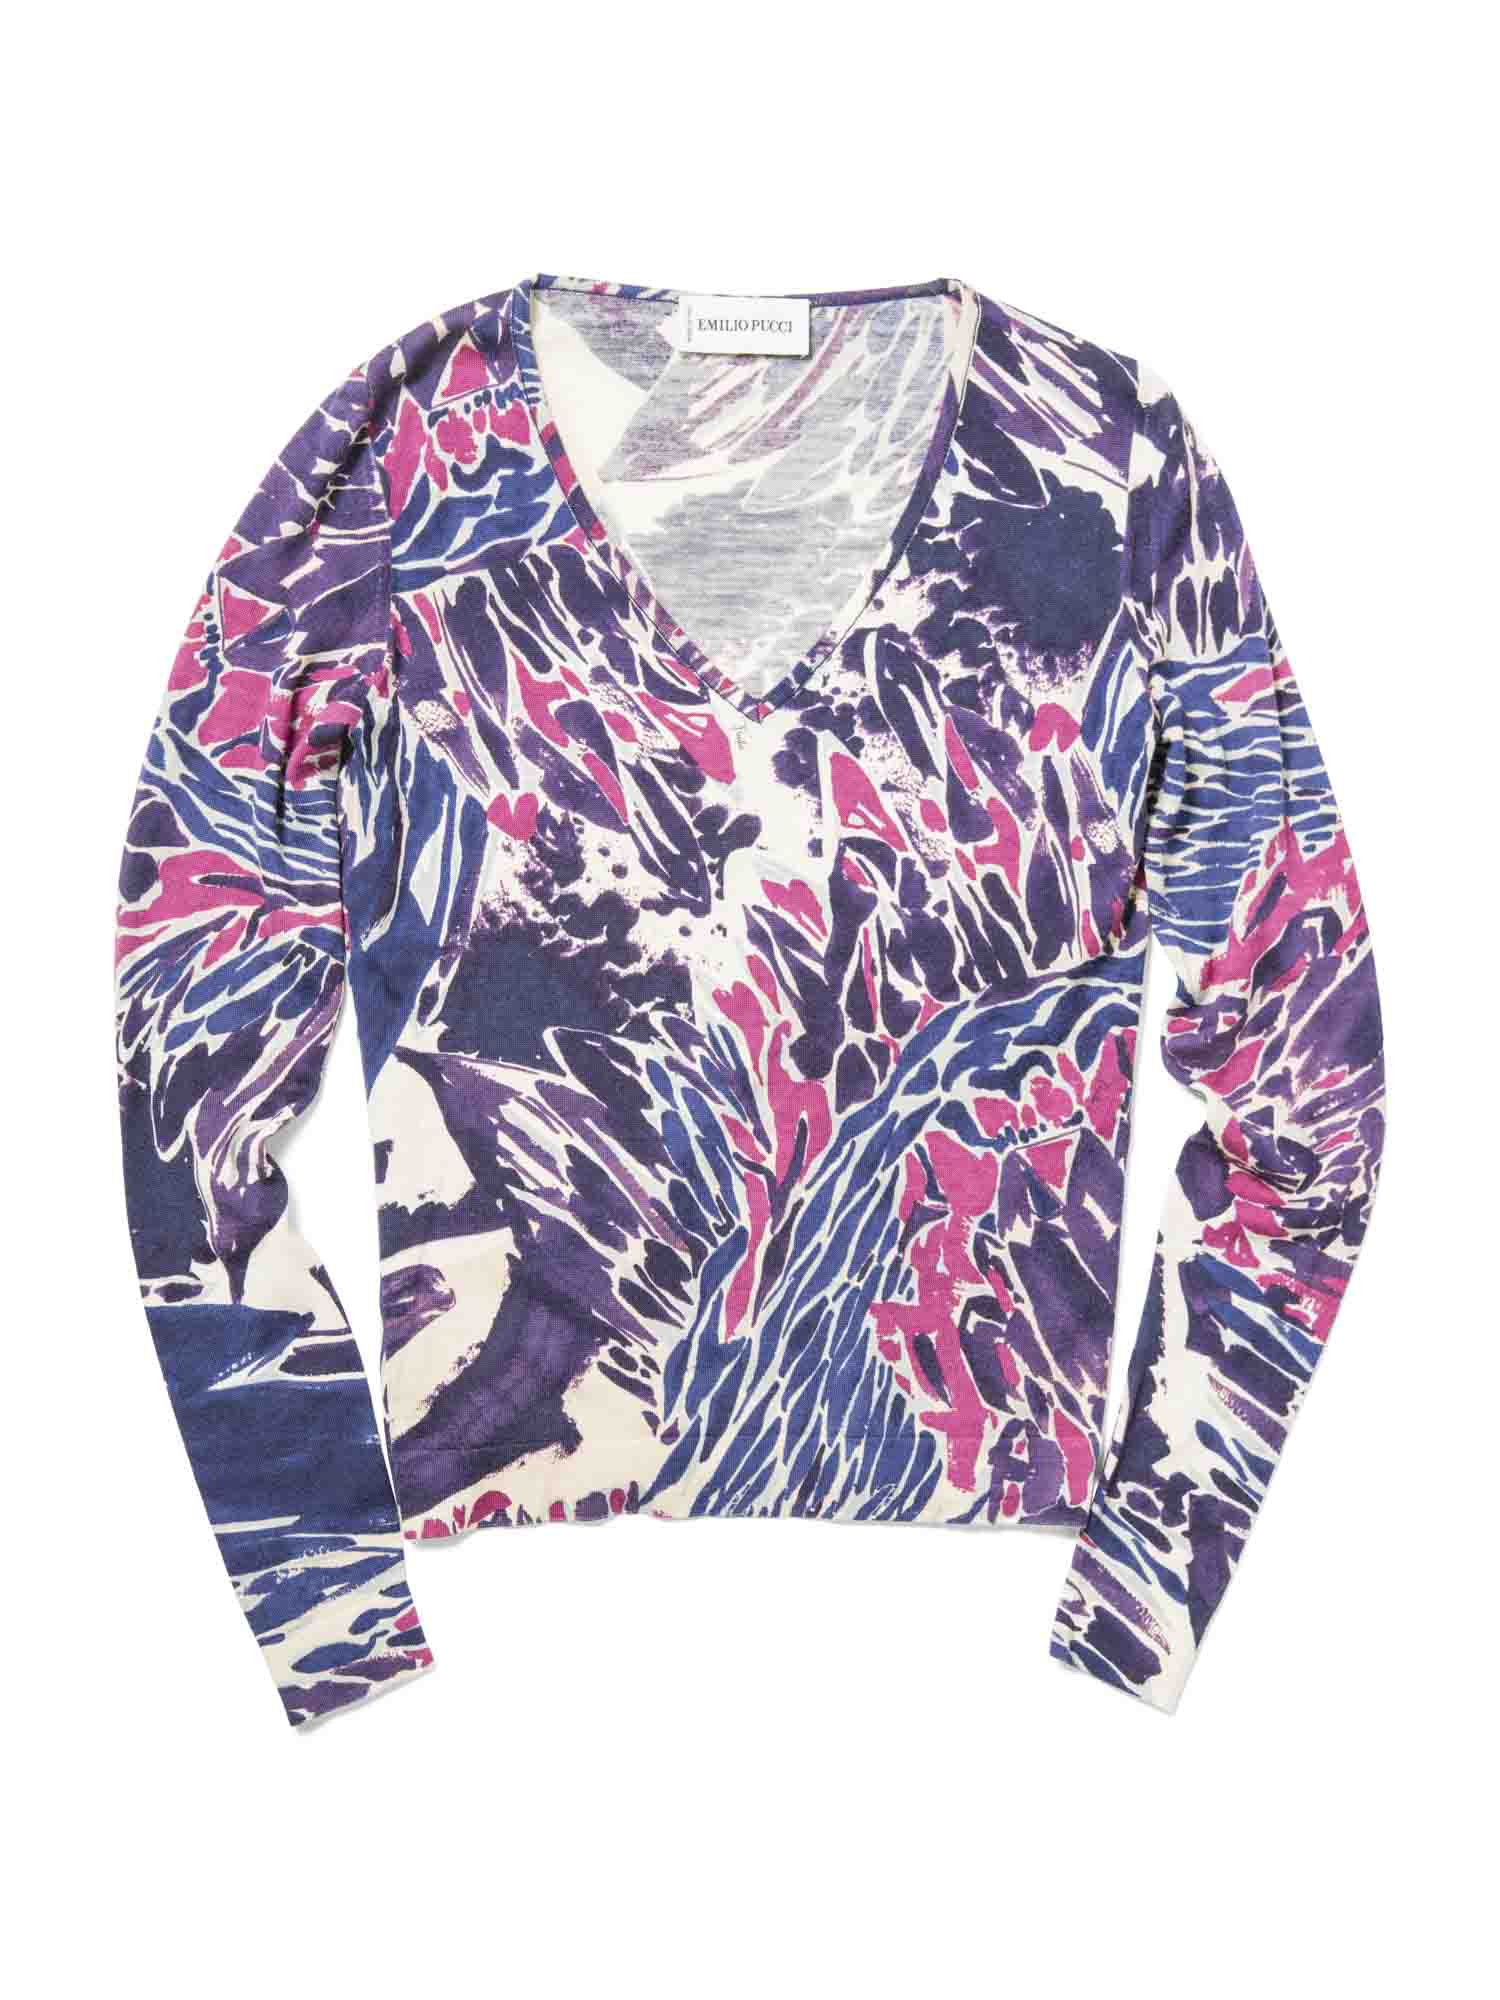 Emilio Pucci Cashmere Abstract Signed Long Sleeve Sweater Purple-designer resale